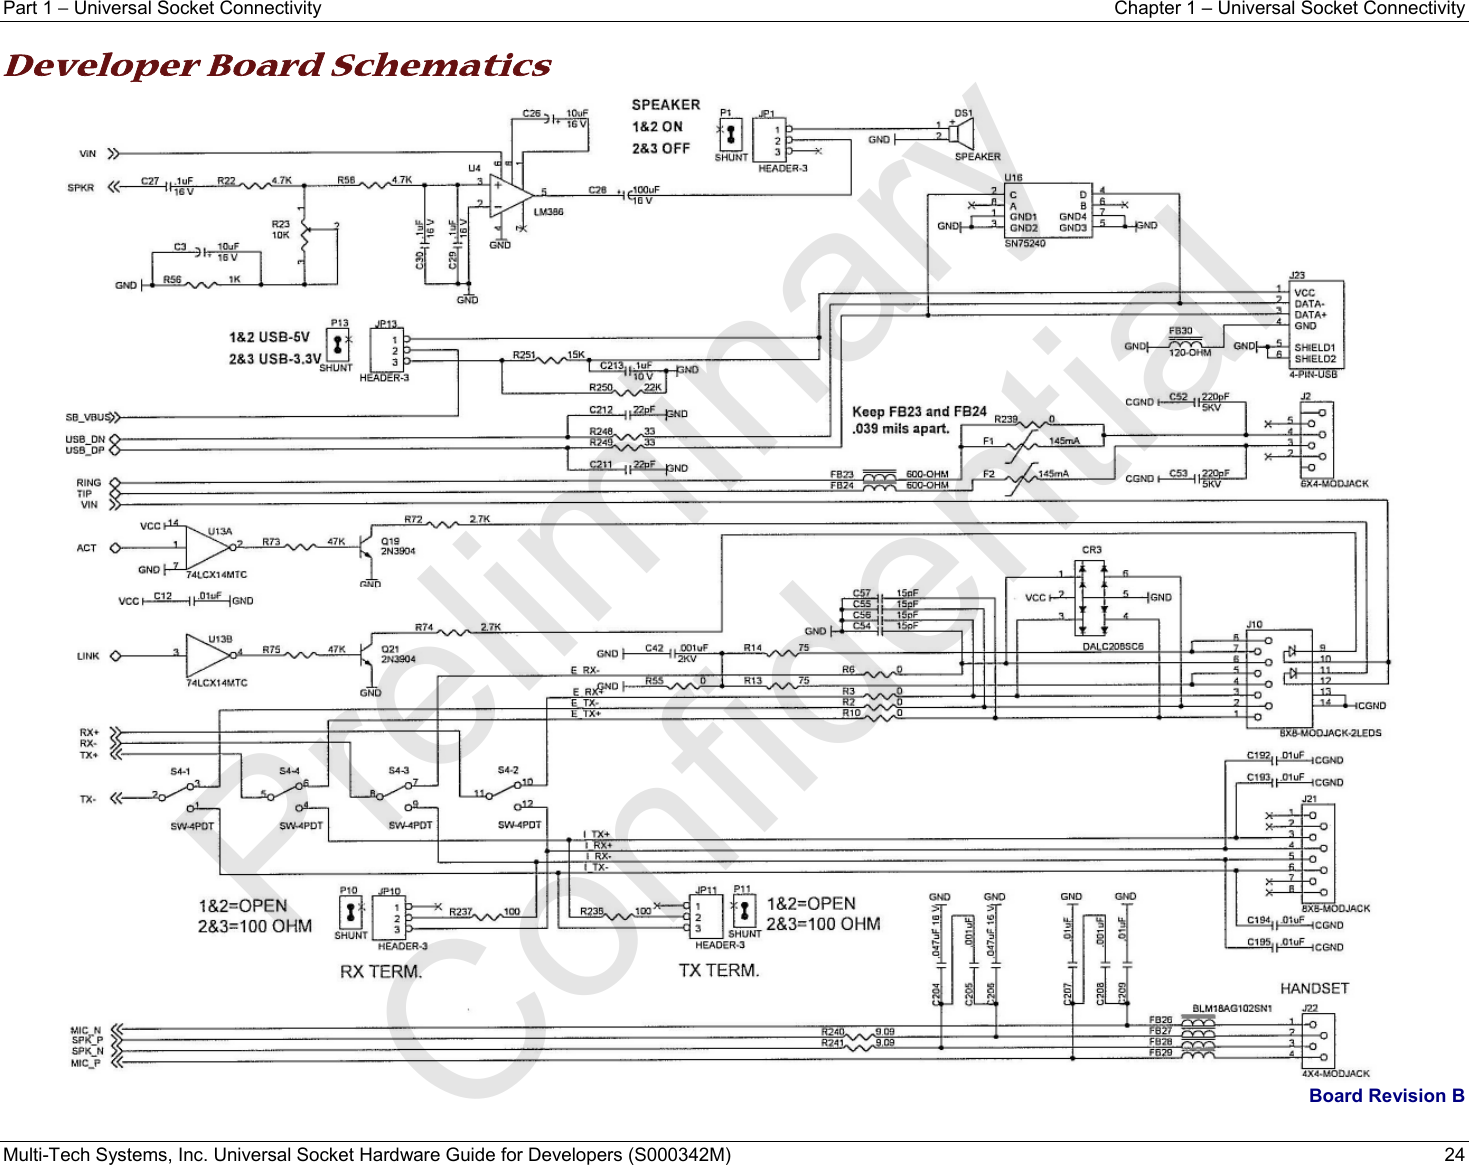 Part 1 − Universal Socket Connectivity  Chapter 1 – Universal Socket Connectivity Multi-Tech Systems, Inc. Universal Socket Hardware Guide for Developers (S000342M)  24  Developer Board Schematics  Board Revision B  Preliminary  Confidential